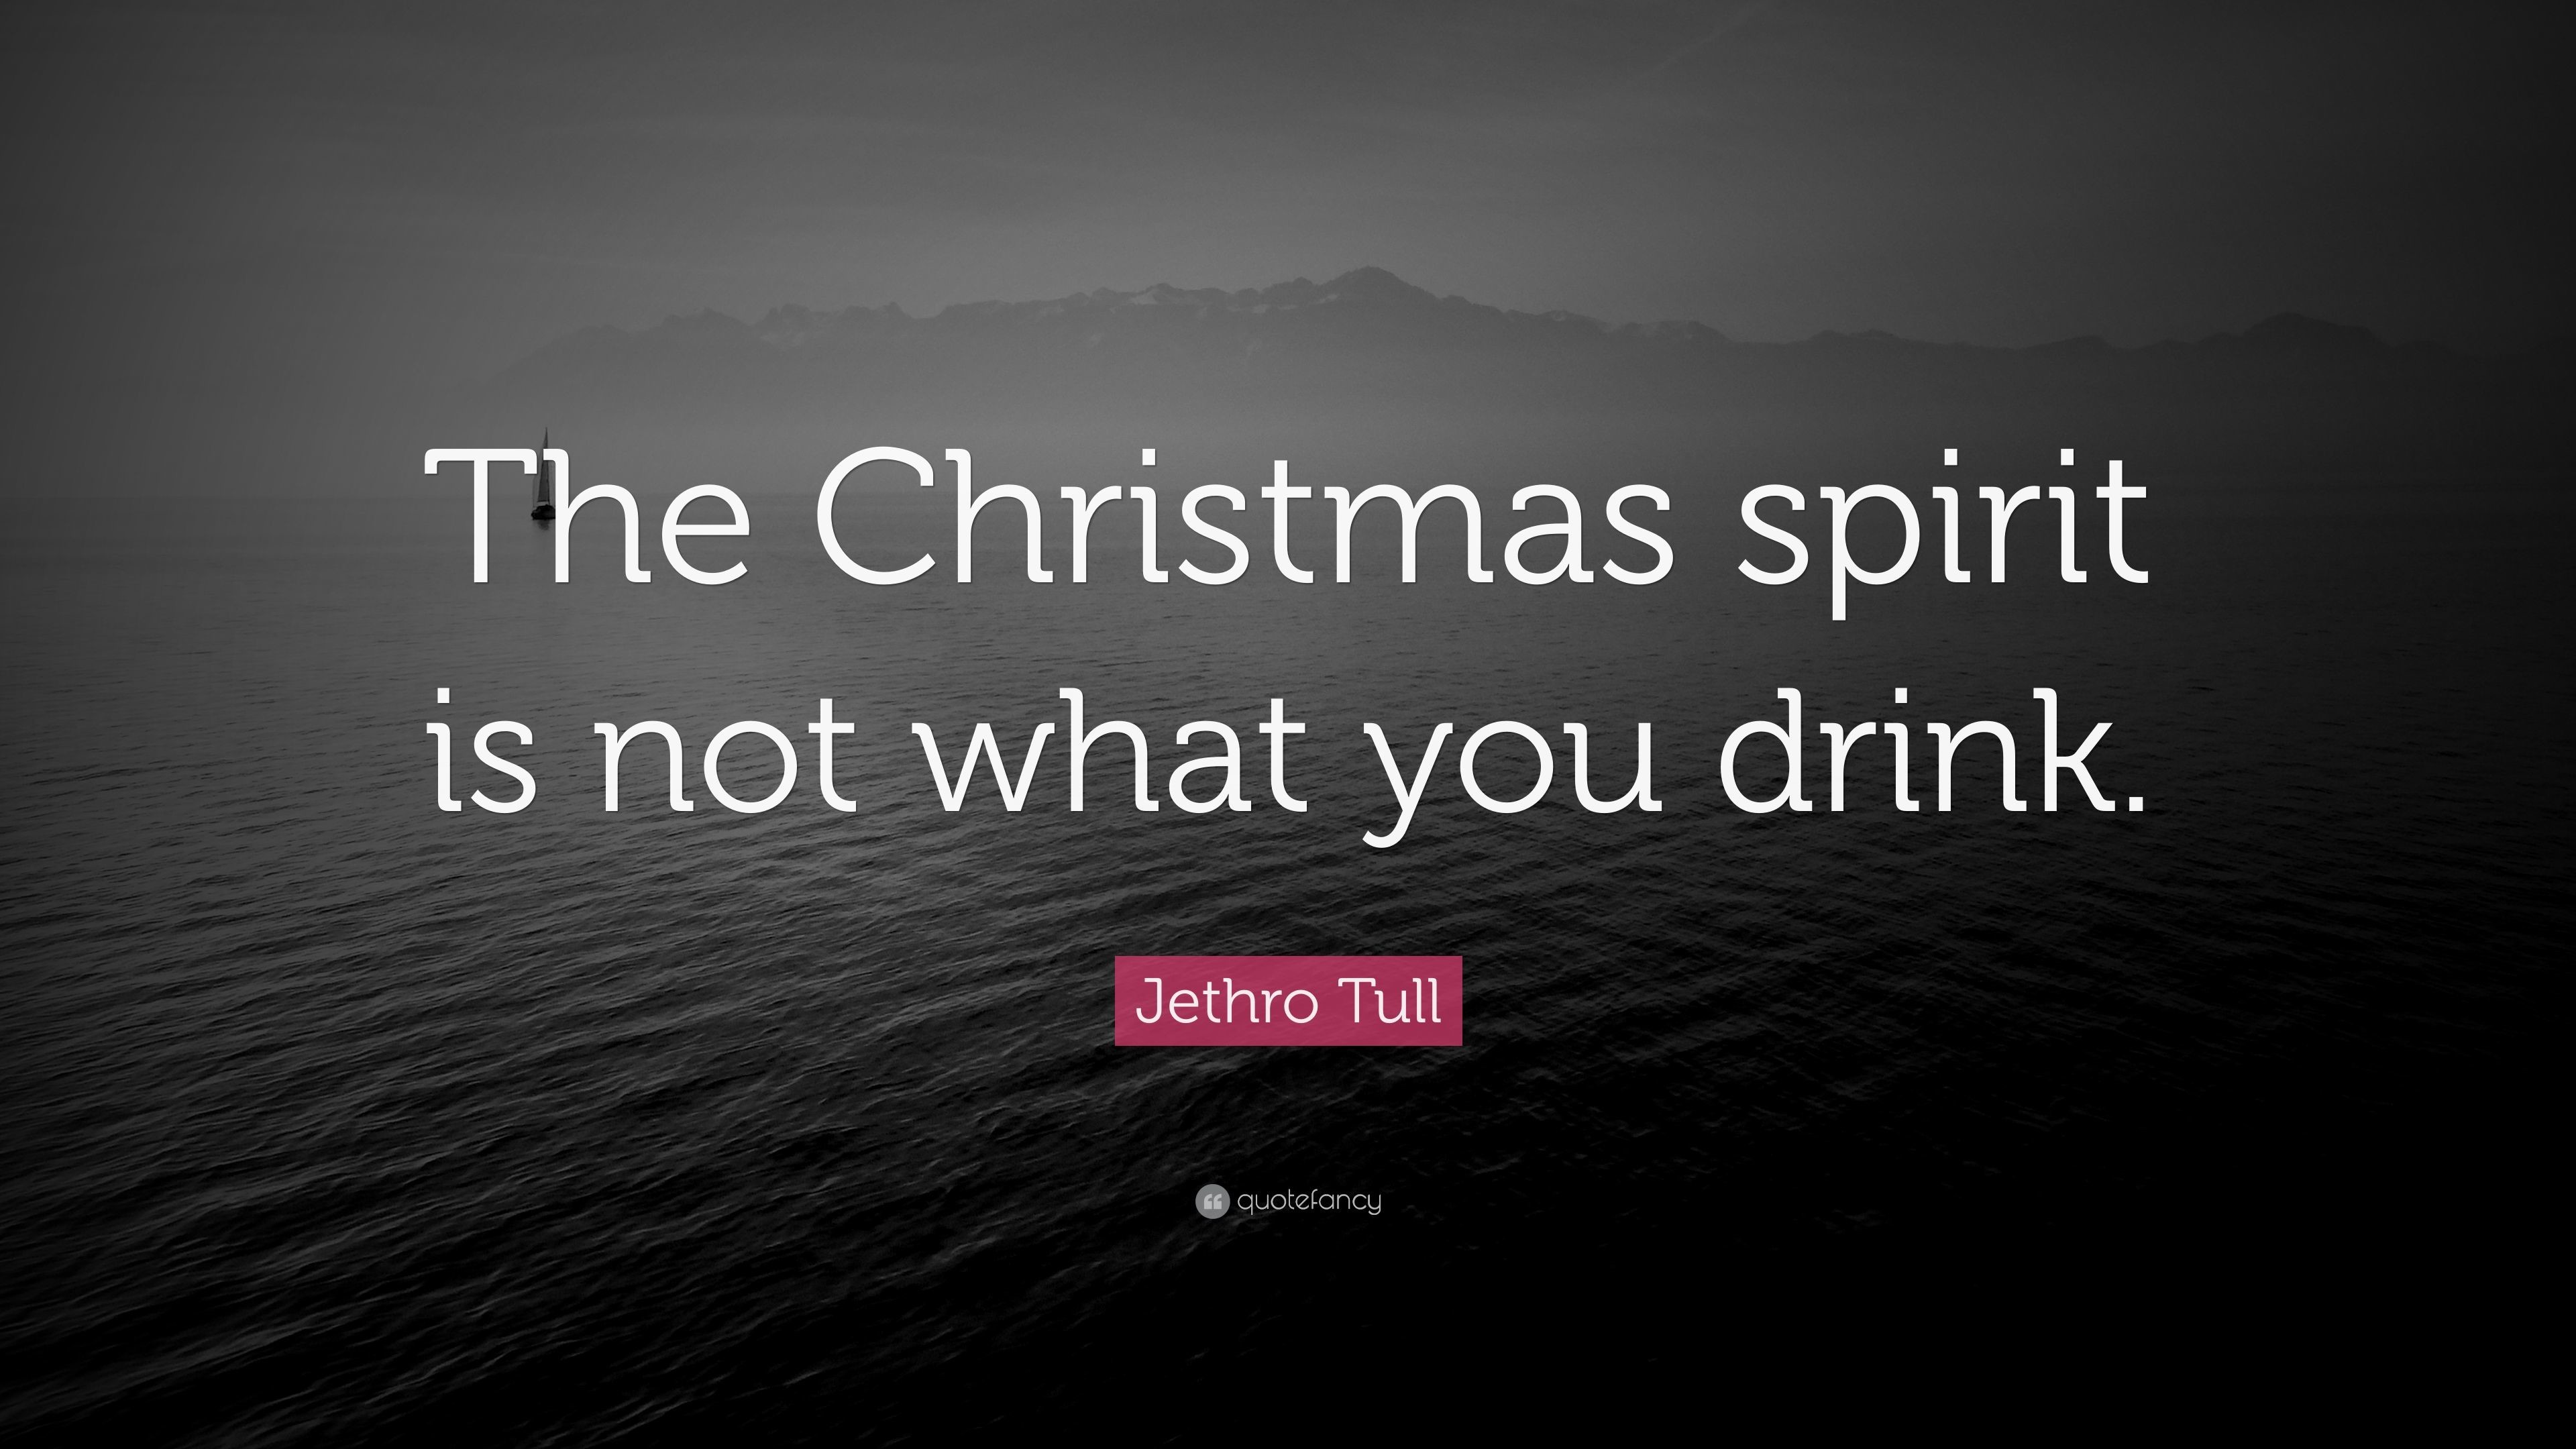 3840x2160 Jethro Tull Quote: “The Christmas spirit is not what you drink.”